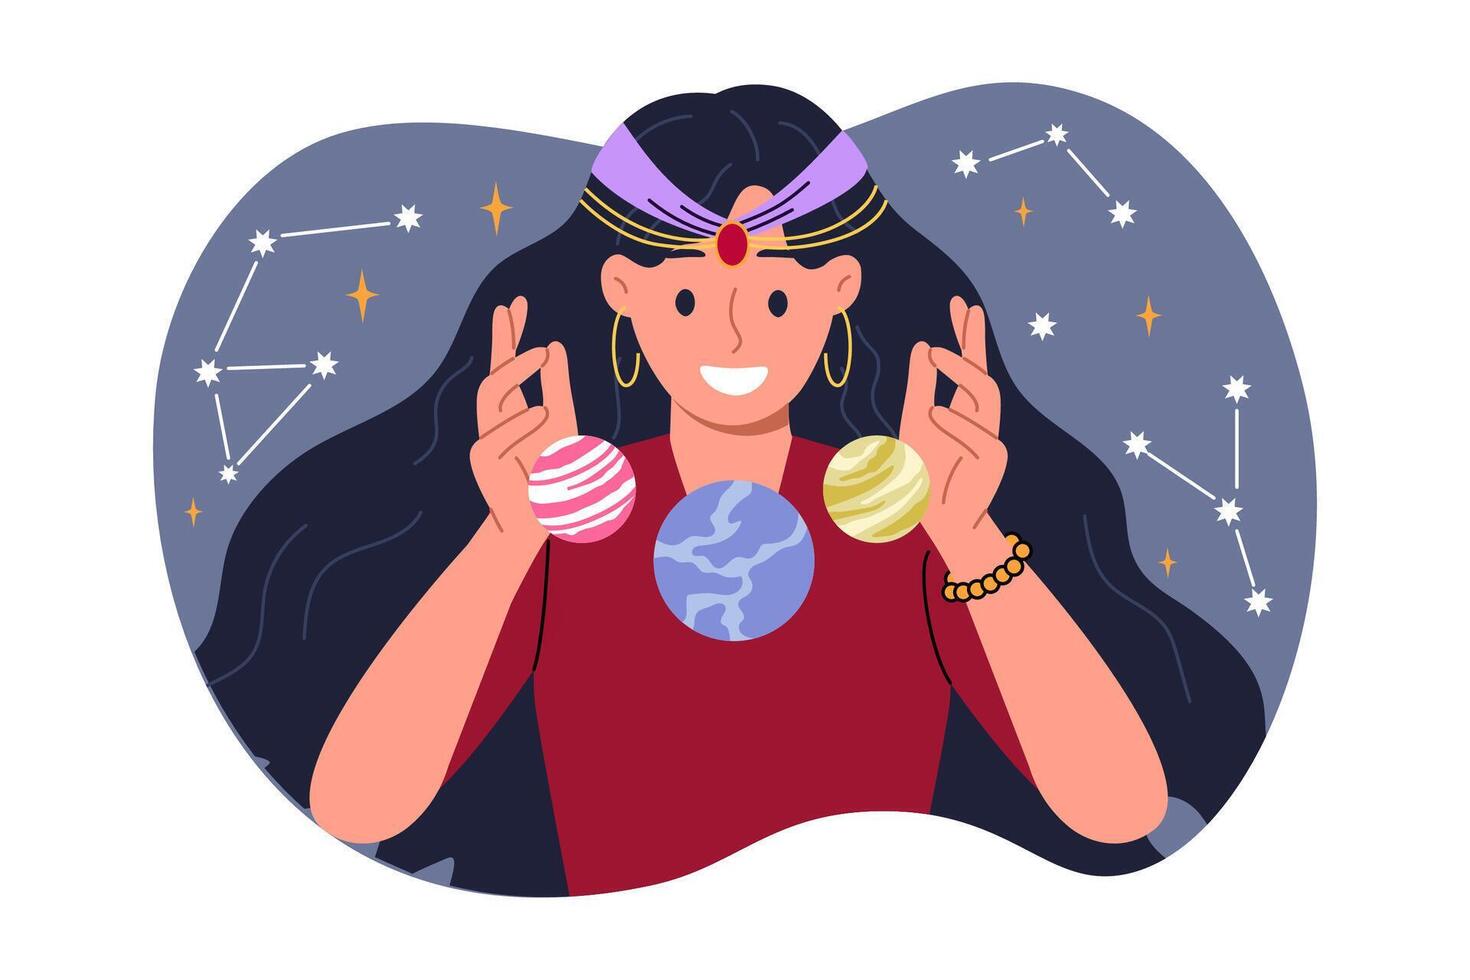 Woman fortune teller is interested in astrology, predicting future by studying constellations in sky vector